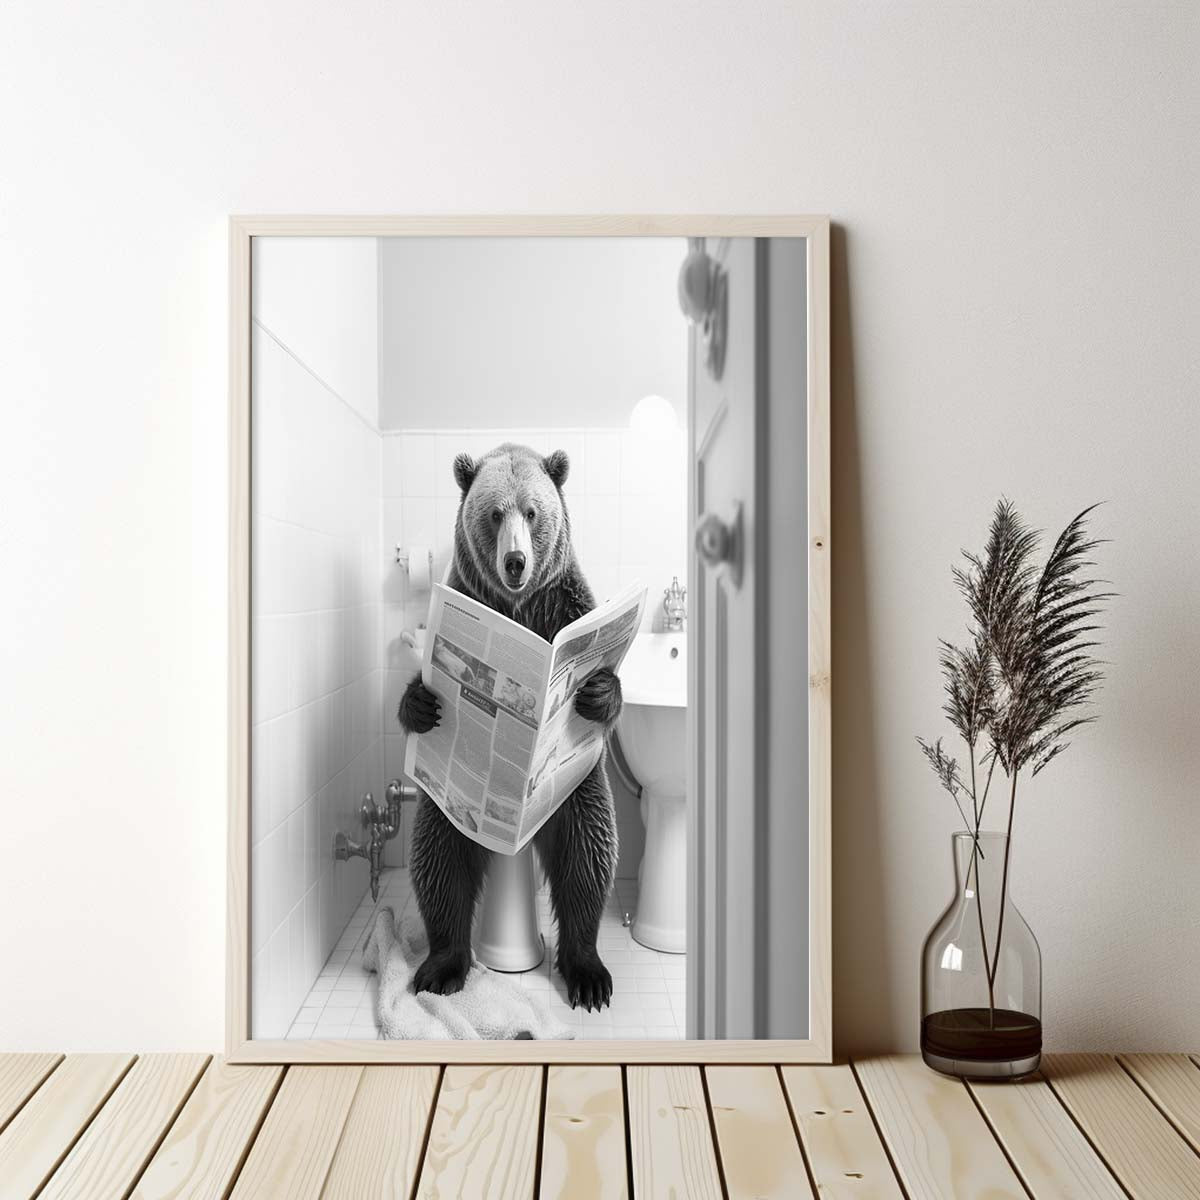 Bear Sitting on the Toilet Reading a Newspaper, Funny Bathroom Wall Decor, Funny Animal Print, Home Printables, Digital Download